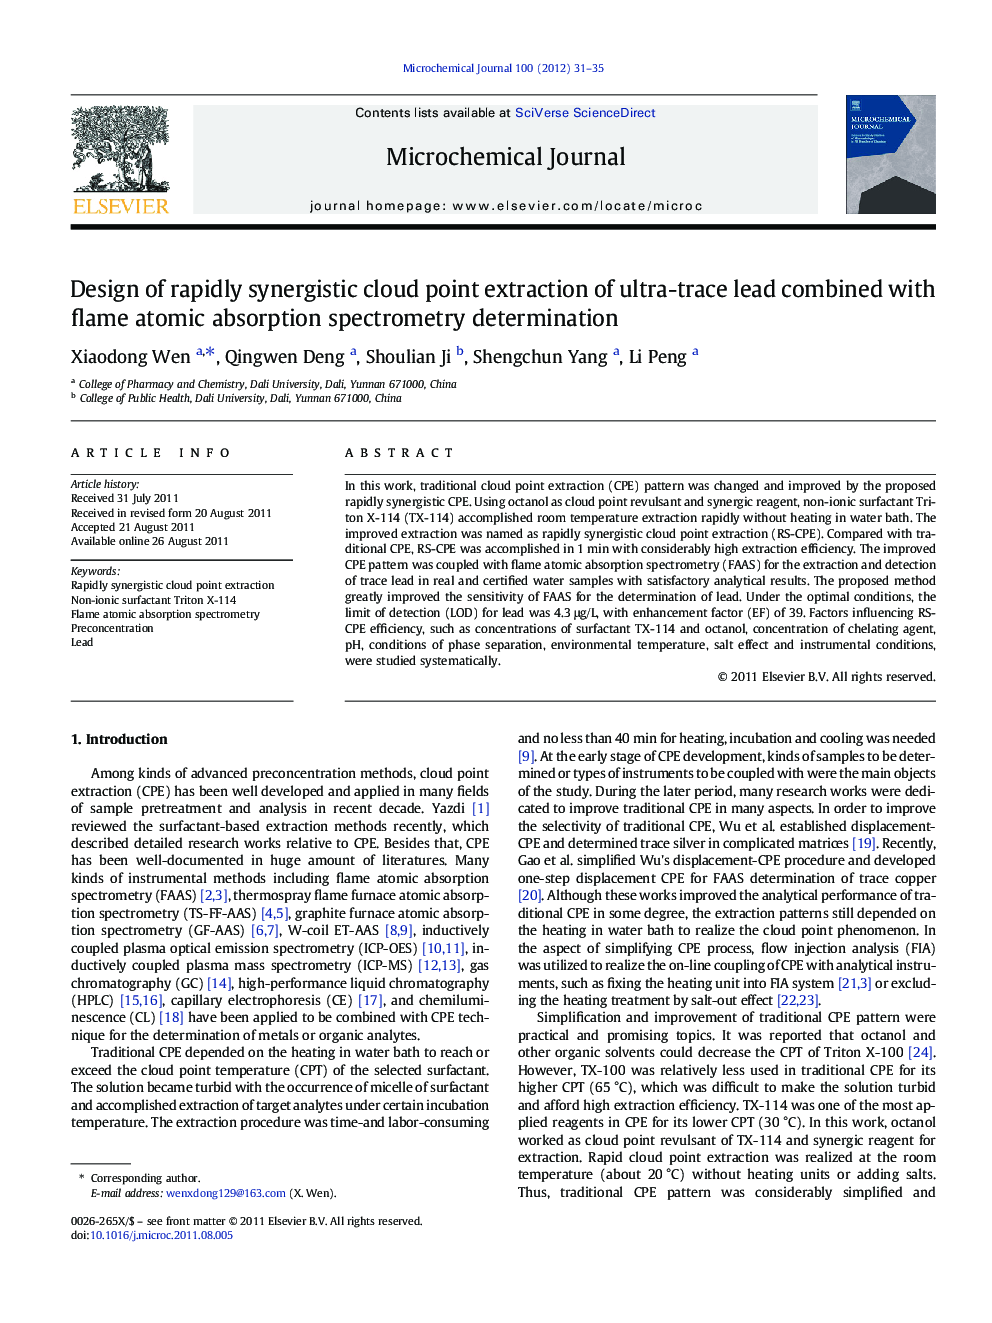 Design of rapidly synergistic cloud point extraction of ultra-trace lead combined with flame atomic absorption spectrometry determination